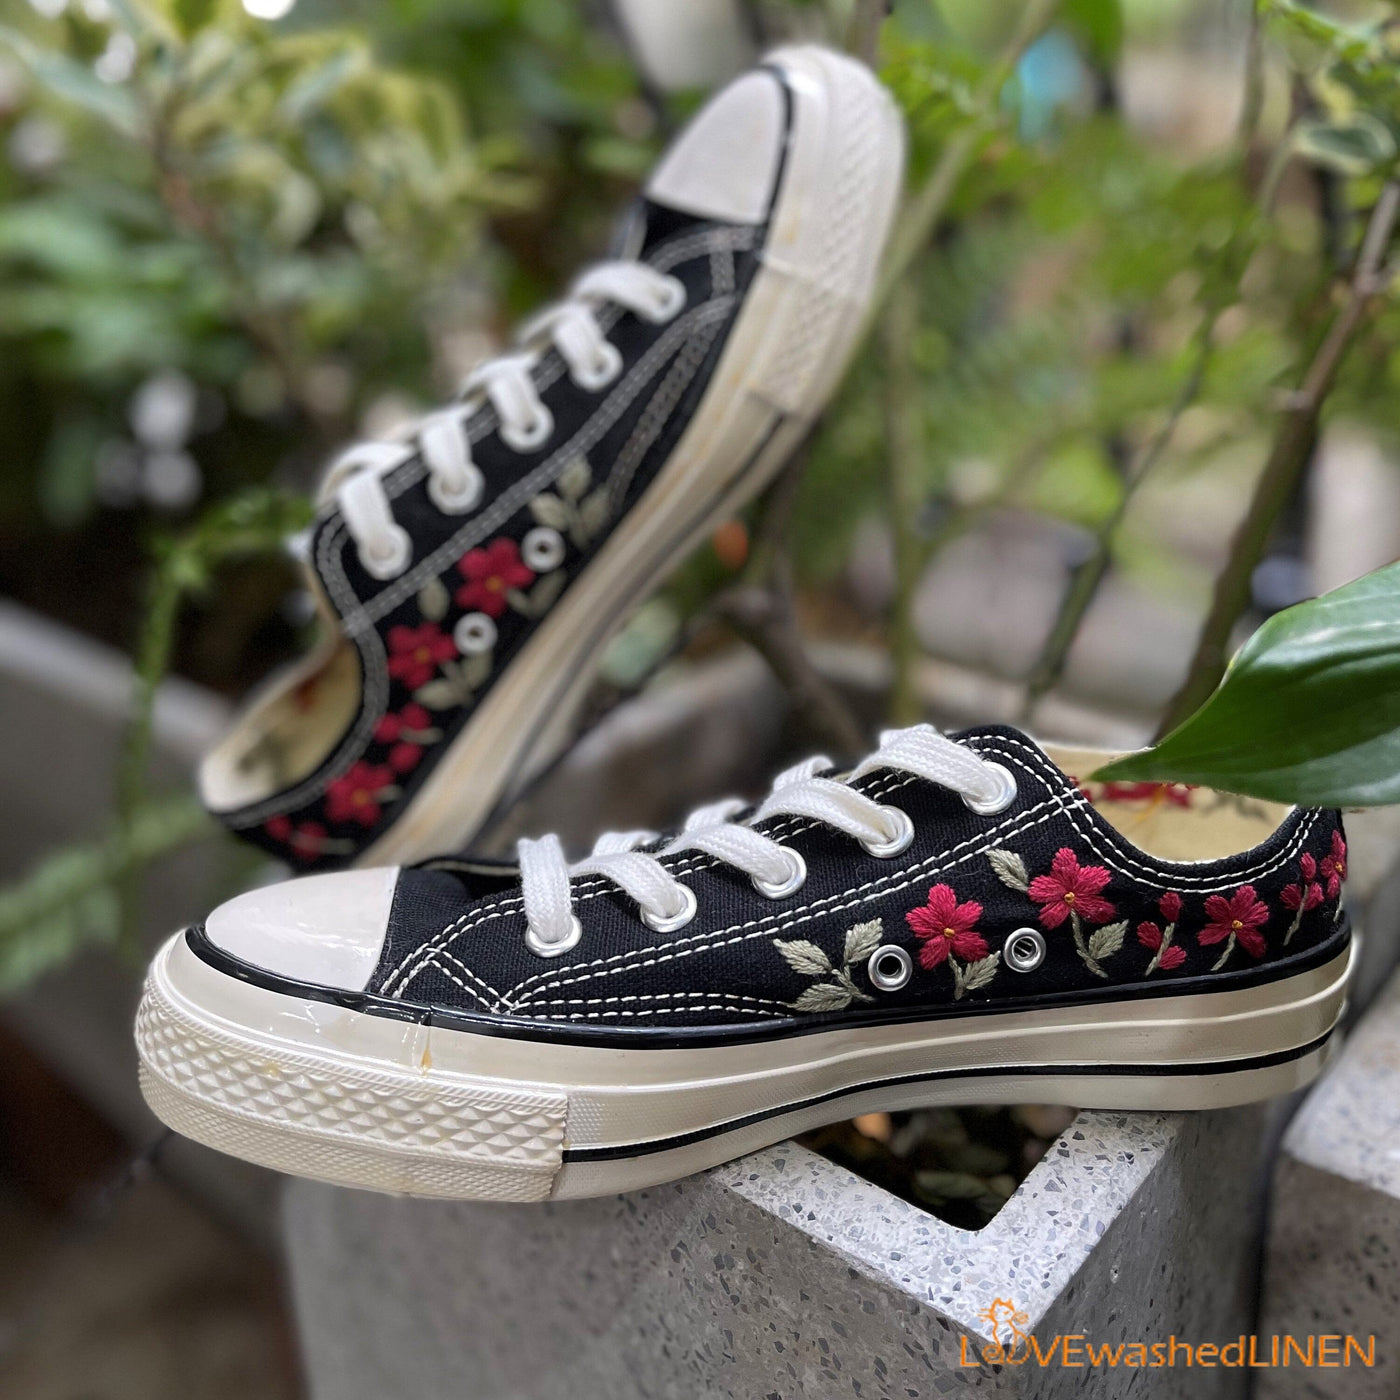 Embroidered Converse Custom Converse Embroidered Oriental Plum Blossom